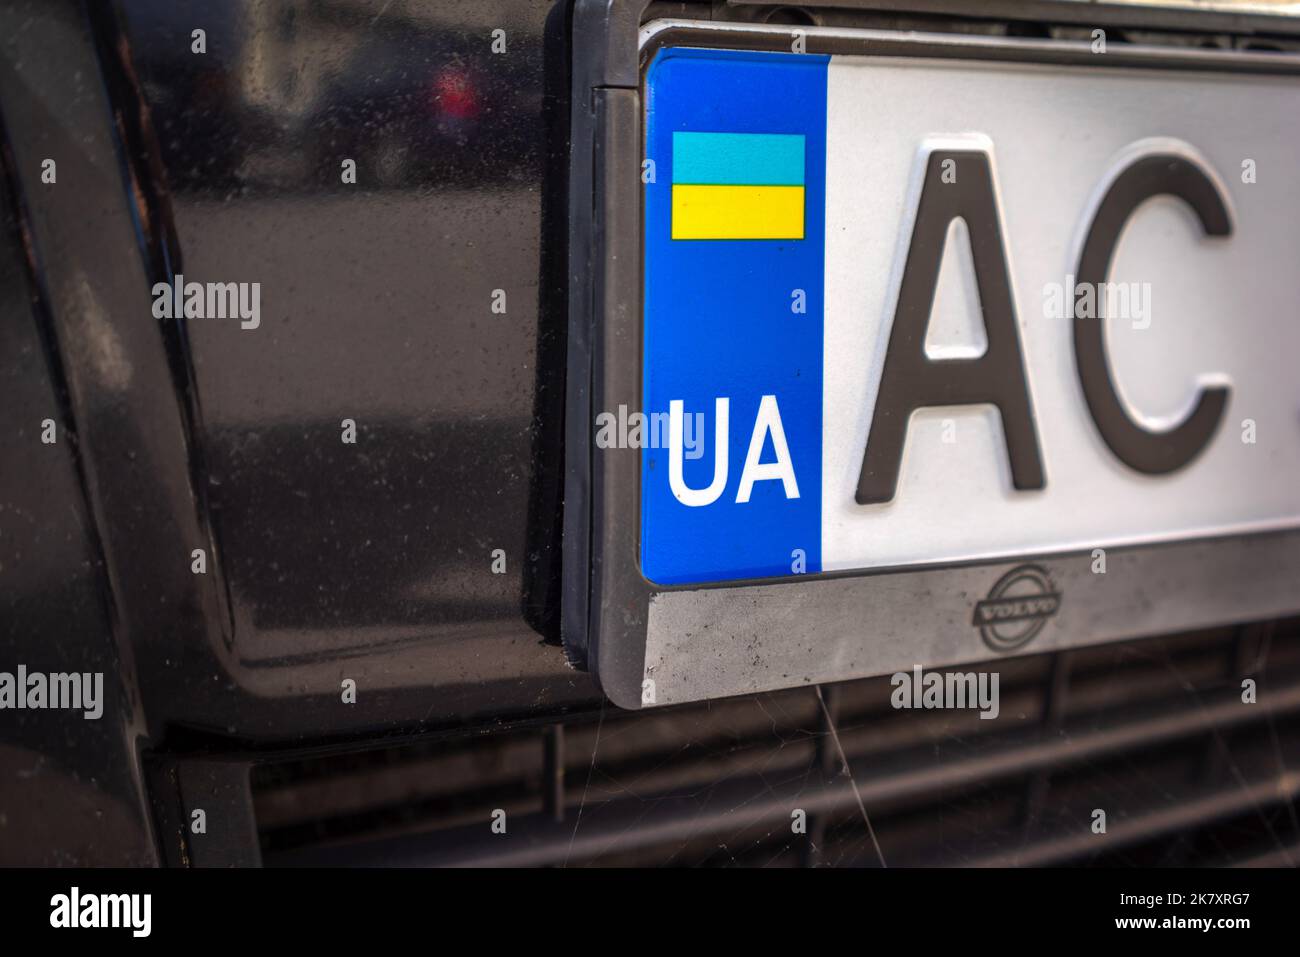 Ukrainian car / vehicle registration number plate displaying the letters UA and the Ukrainian flag Stock Photo